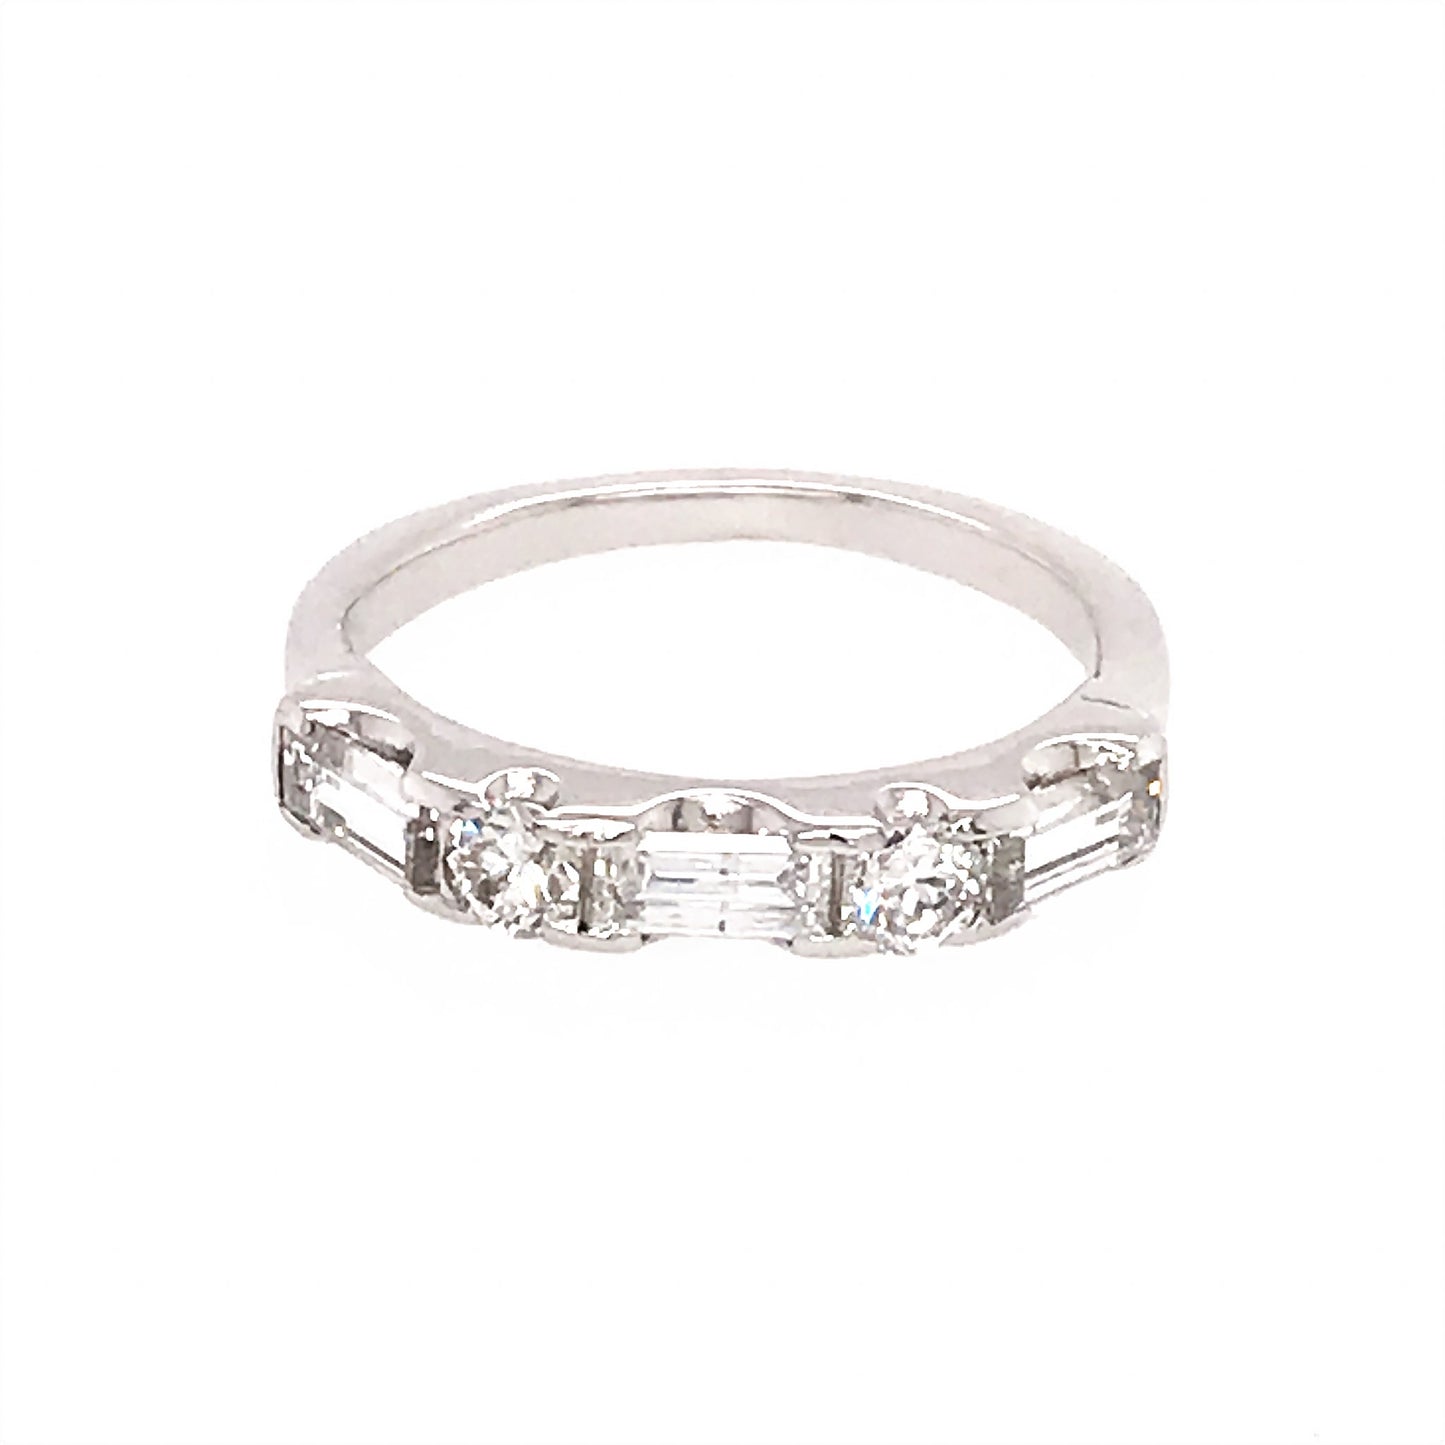 14k White Gold Baguette and Round Diamond Wedding Band Ring Size 5